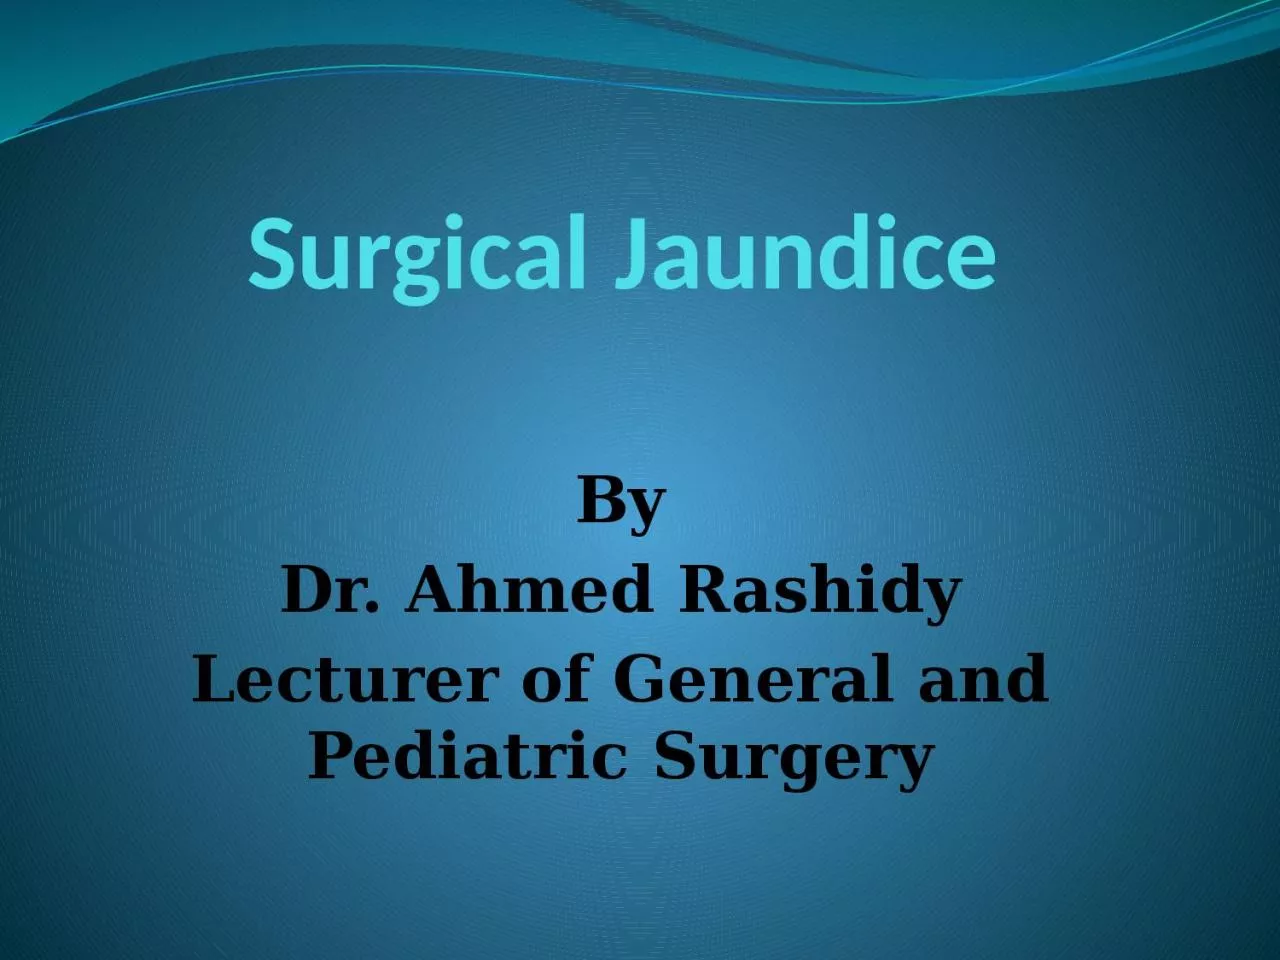 Surgical Jaundice By Dr. Ahmed